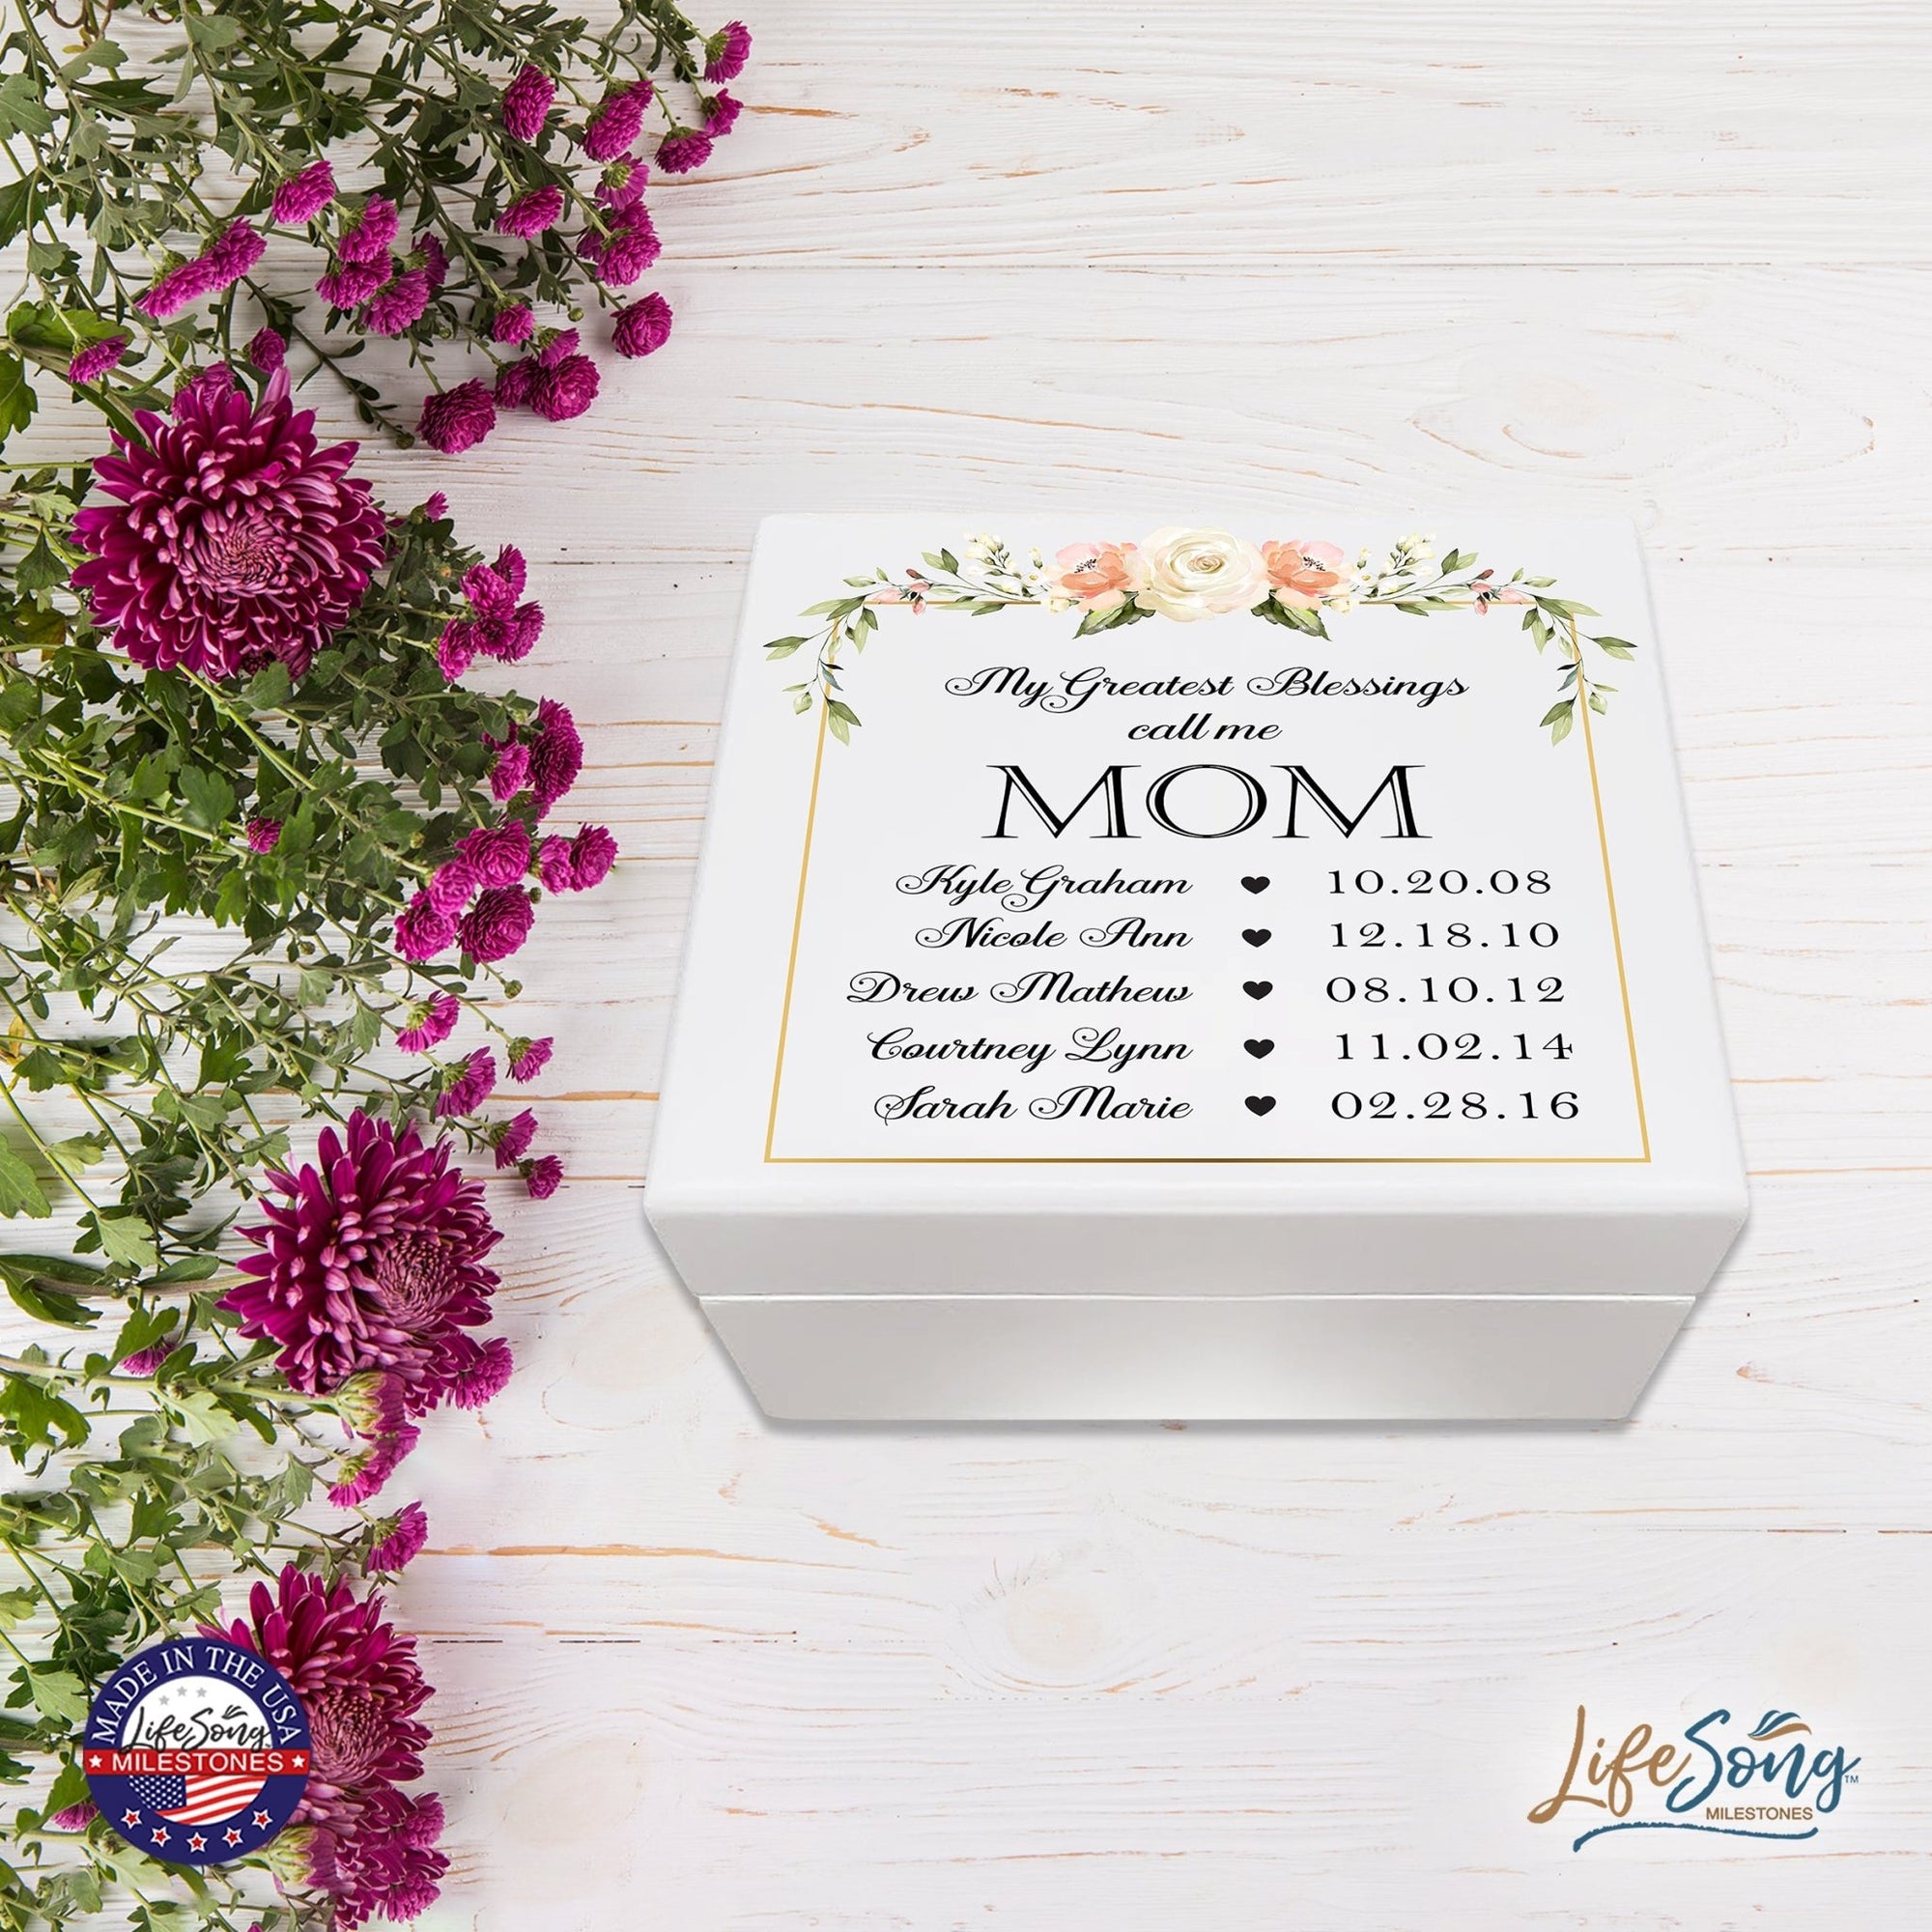 Personalized Memorable Mother’s White Keepsake Box 6x5.5 with inspiring verse - Greatest Blessings - LifeSong Milestones